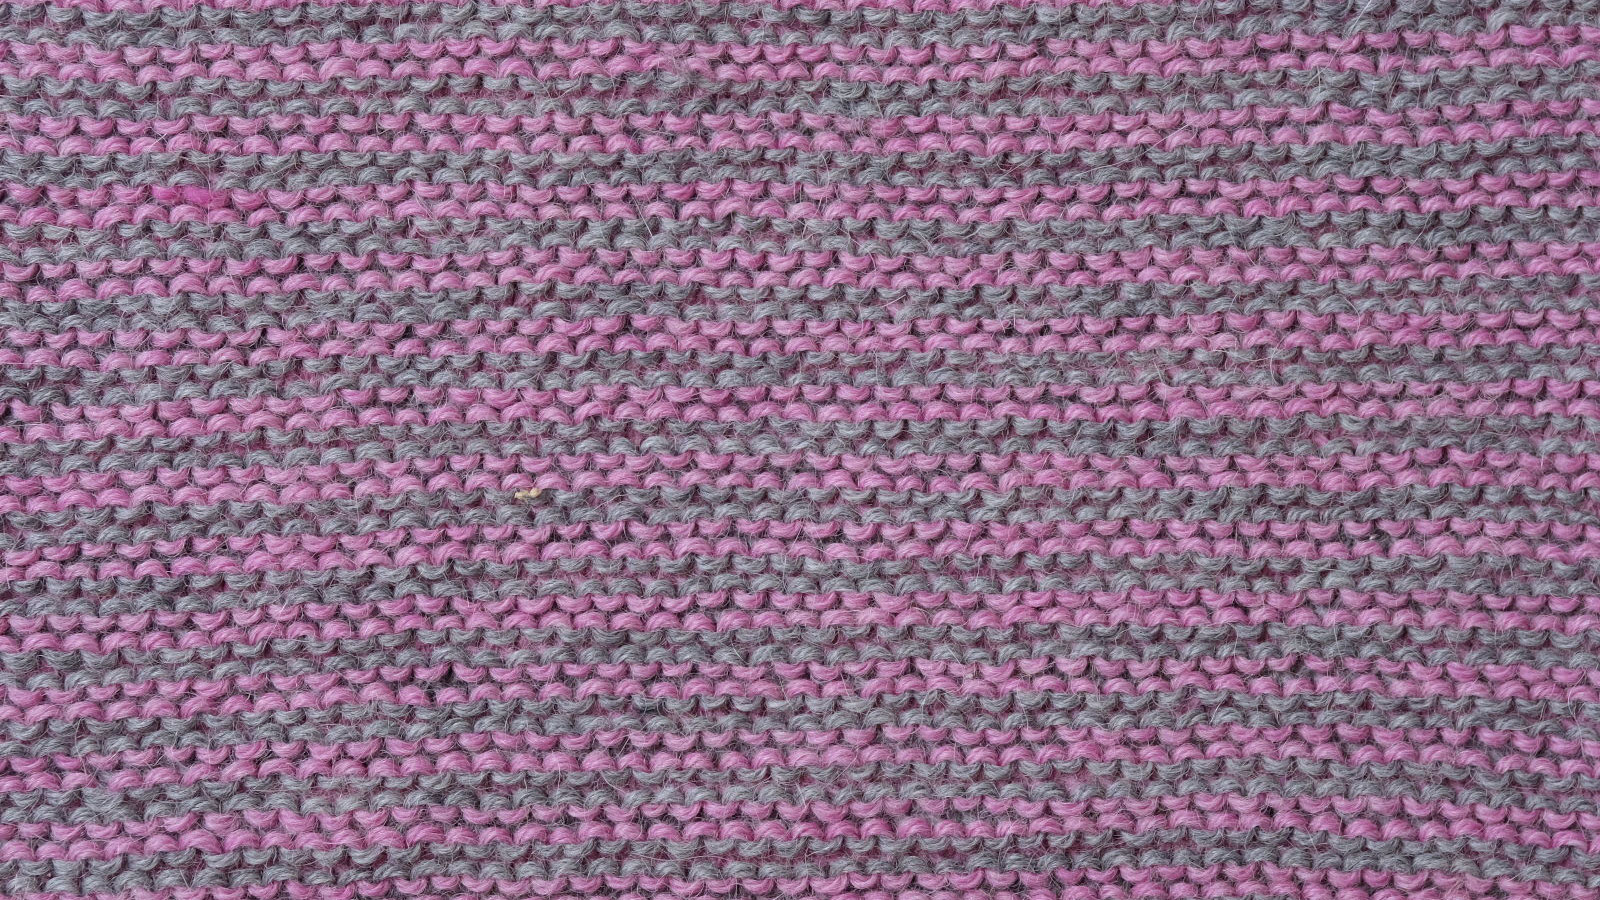 two color garter stitch wrong side